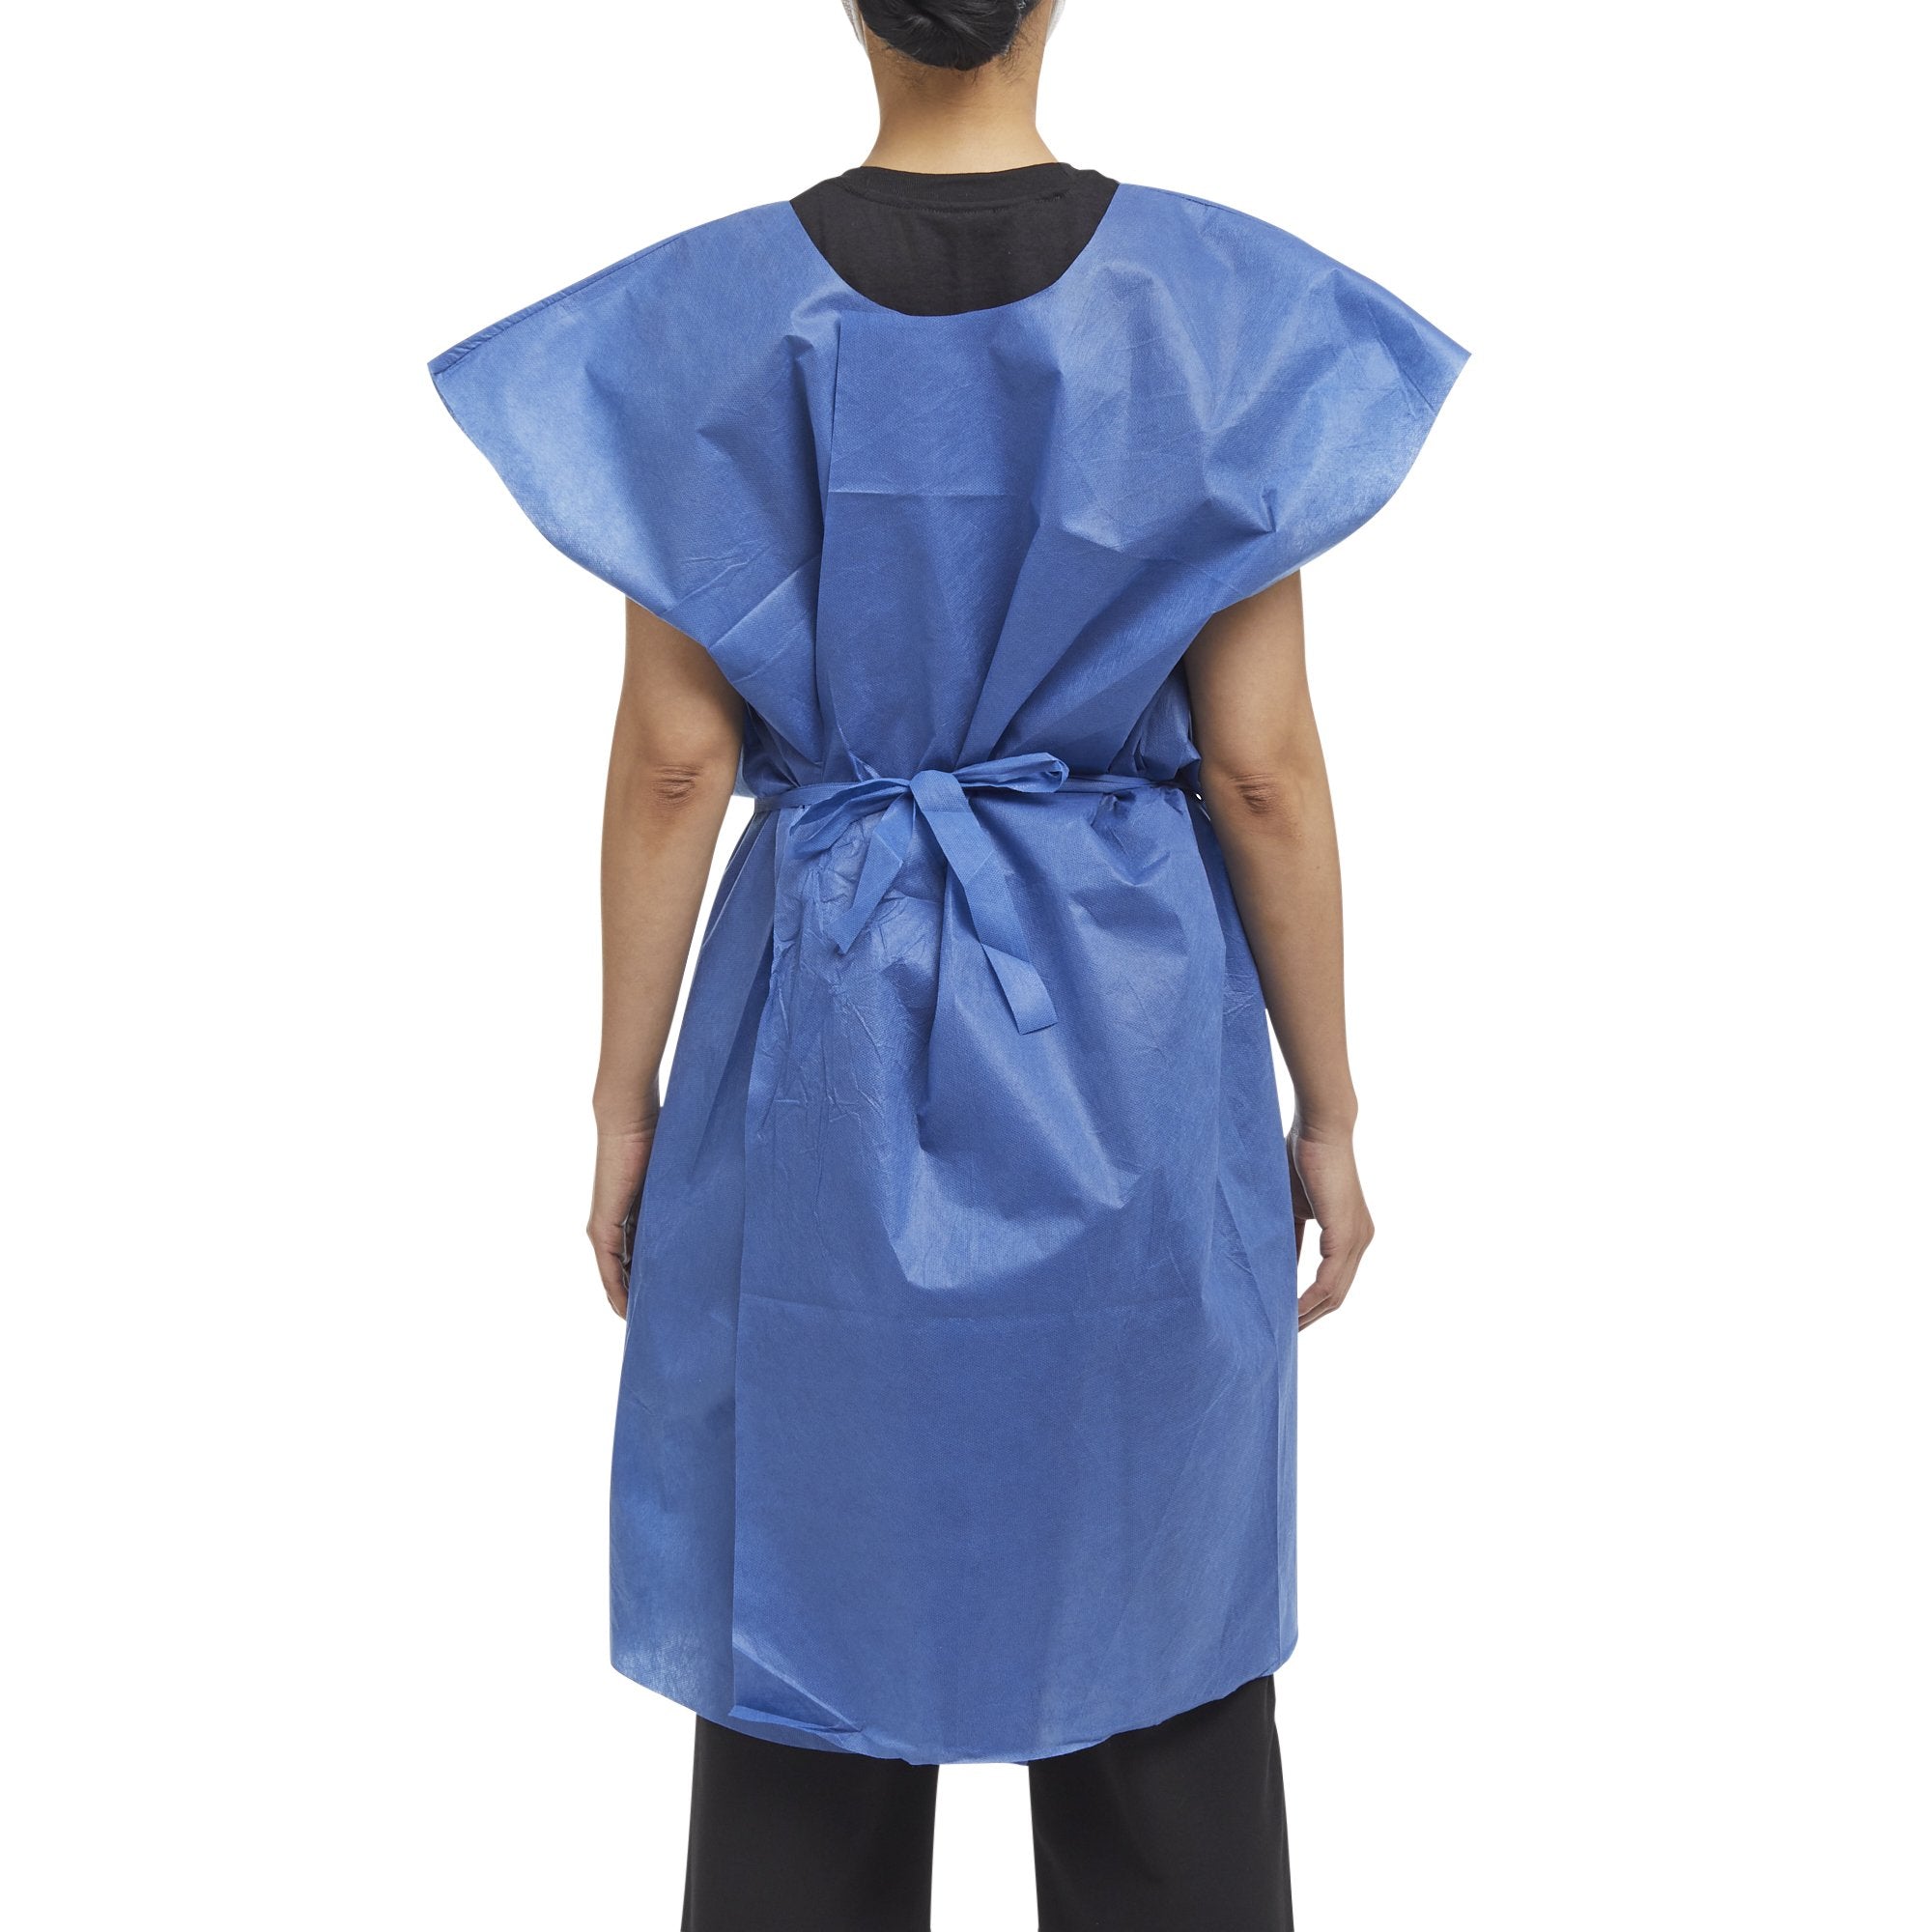 Graham Medical Products Exam Gown, Medium/Large, Blue -Case of 50